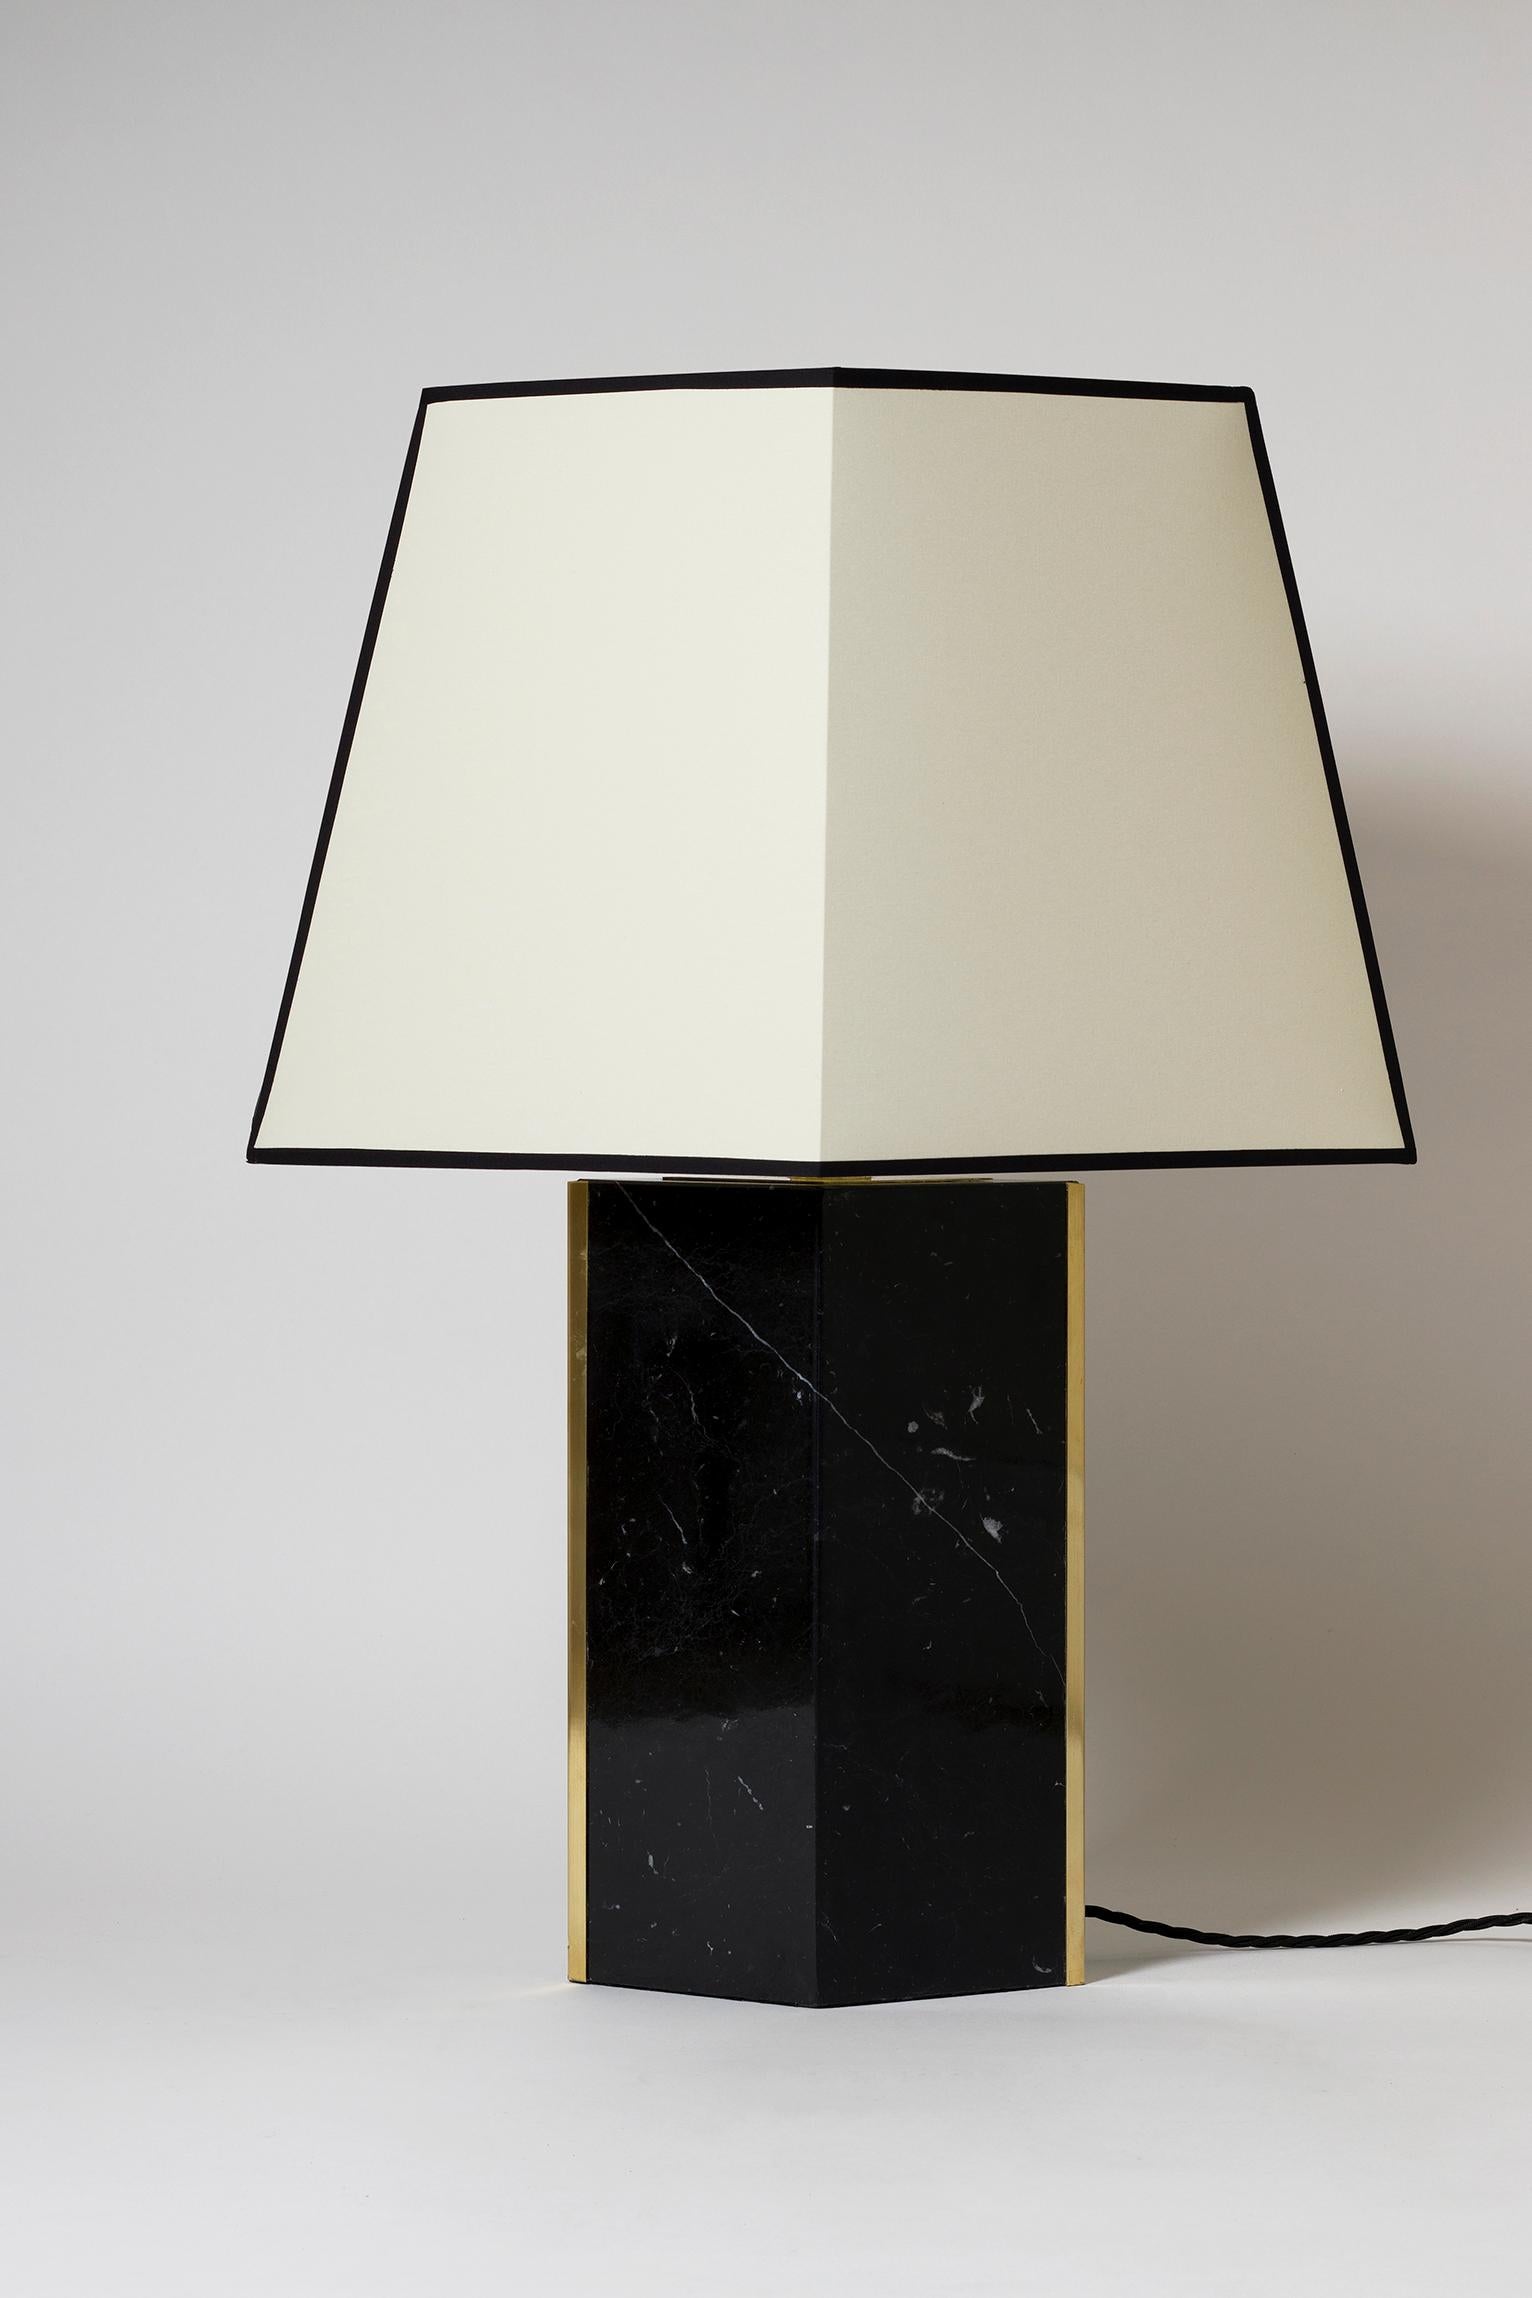 Mid-Century Modern Pair of Black Marble and Brass Table Lamp, by Dorian Caffot de Fawes